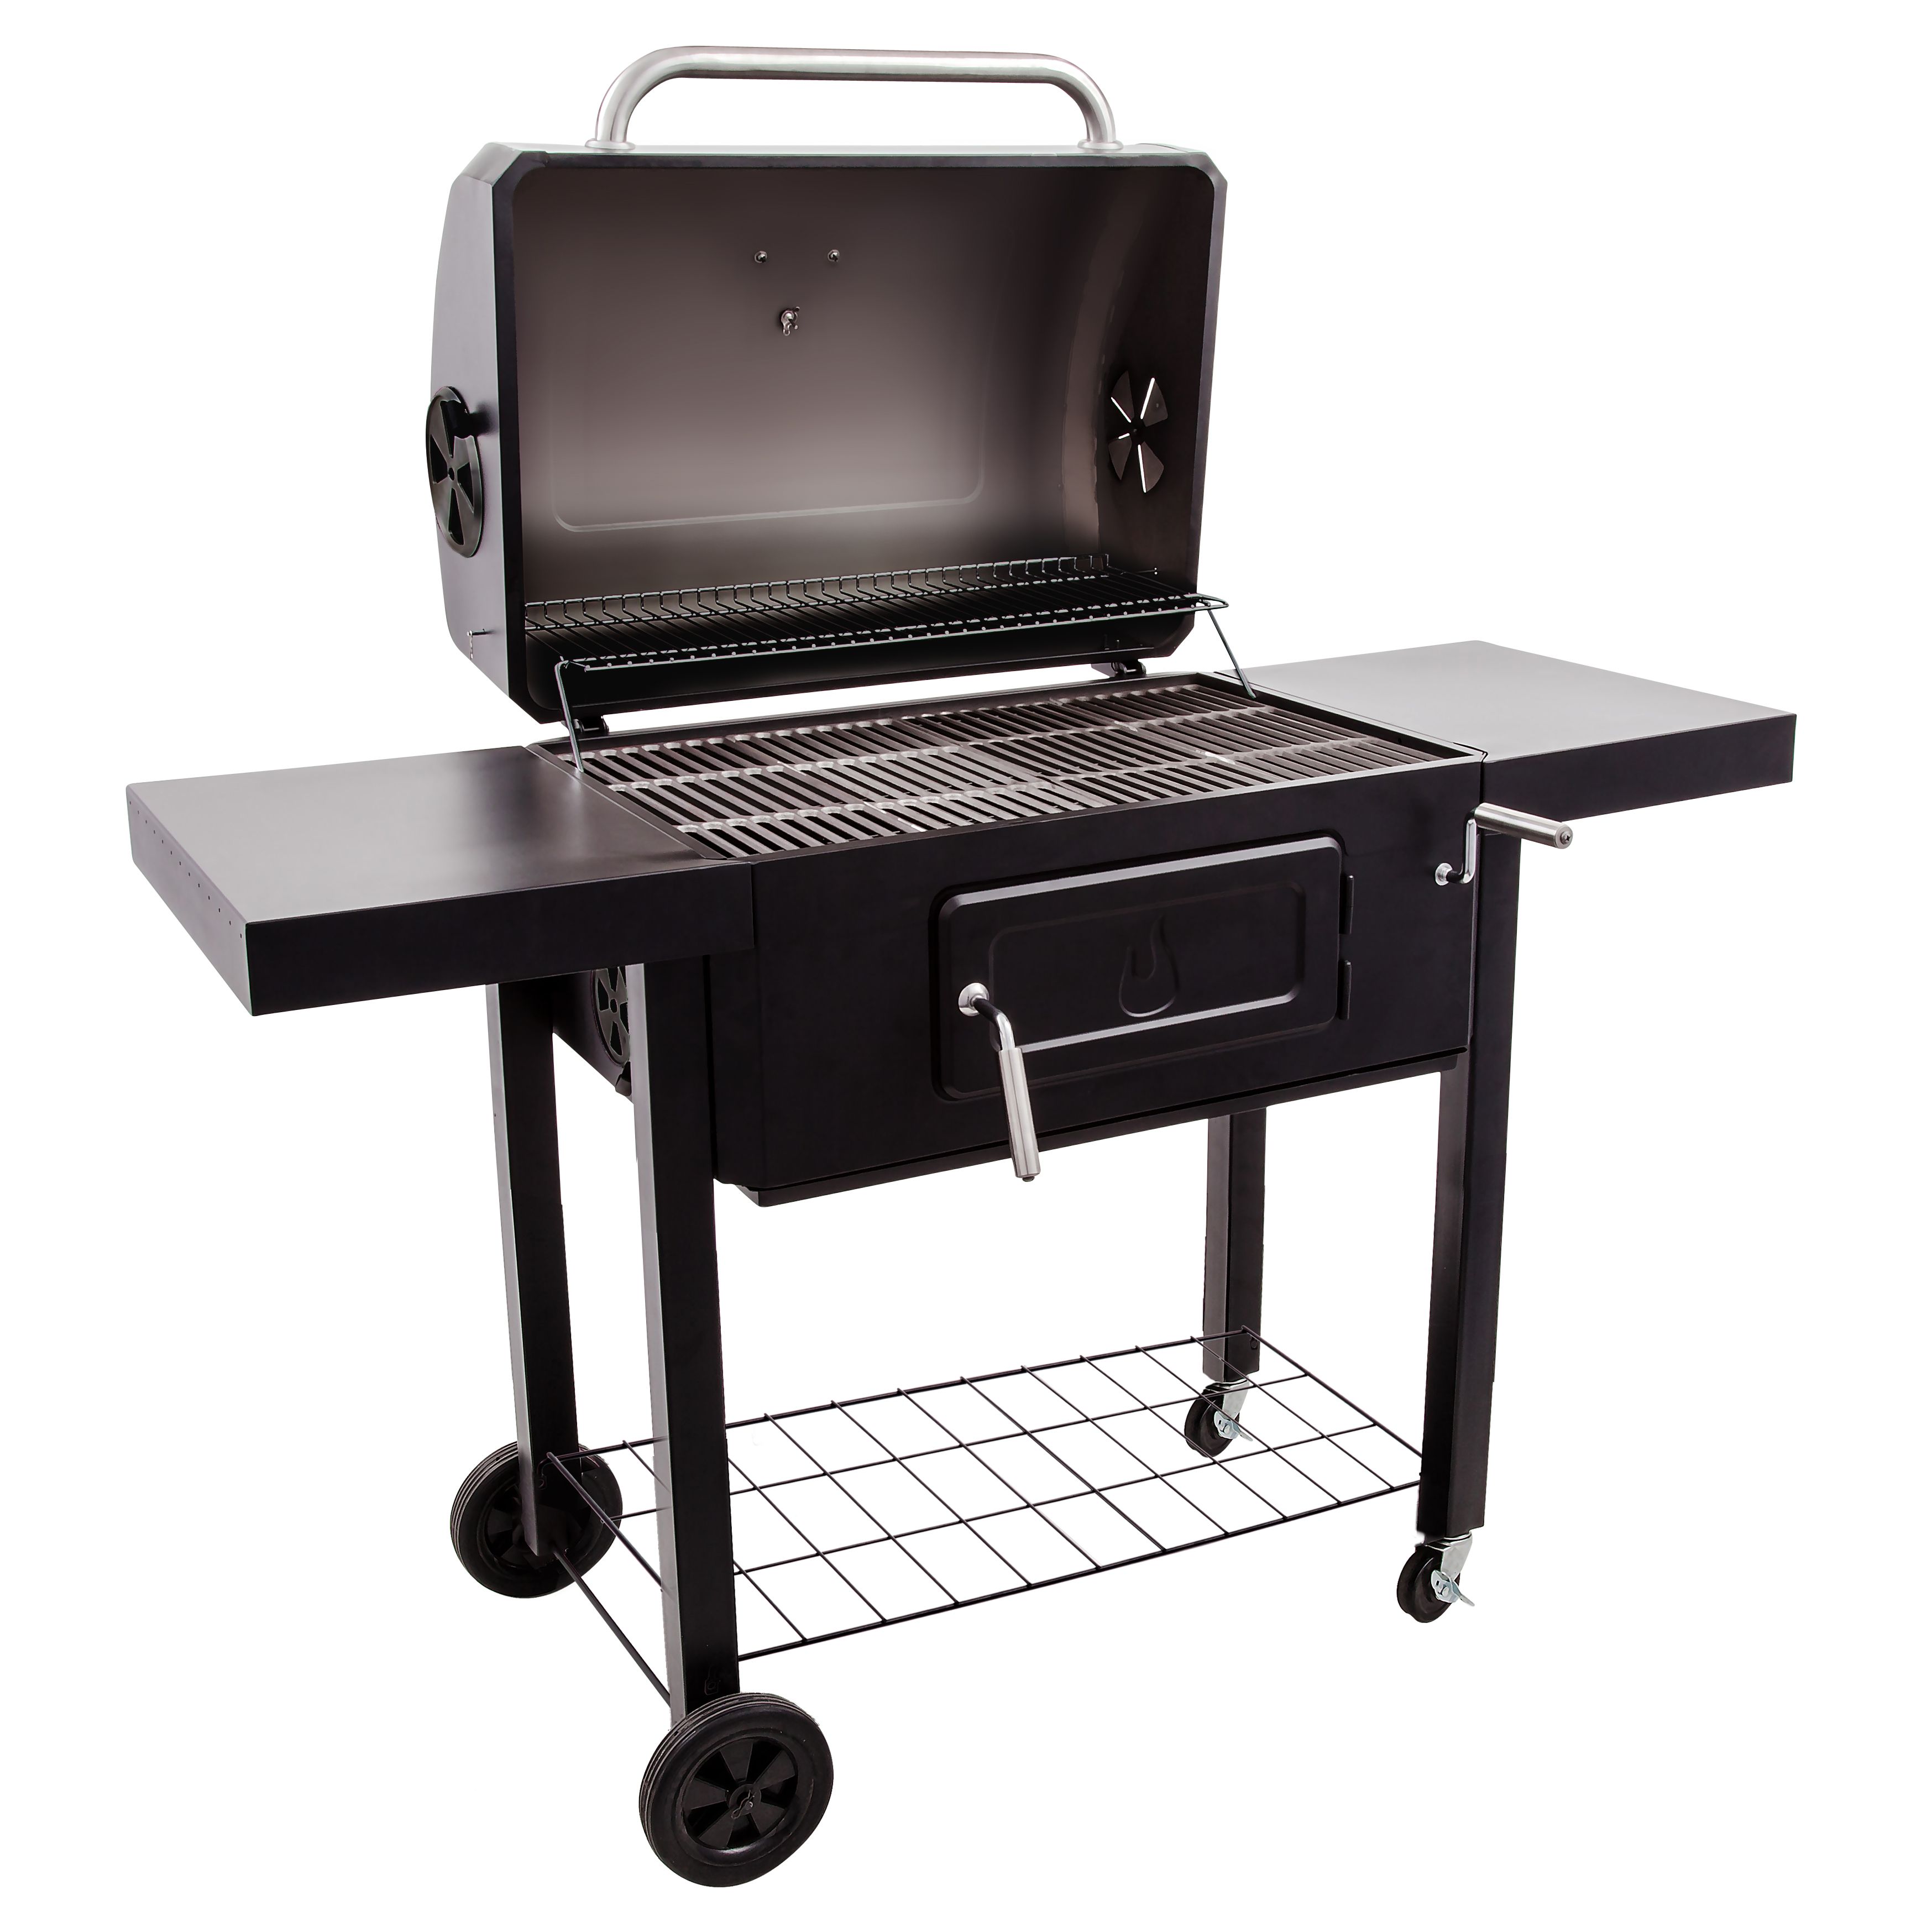 Charbroil 3500 Black Charcoal Barbecue